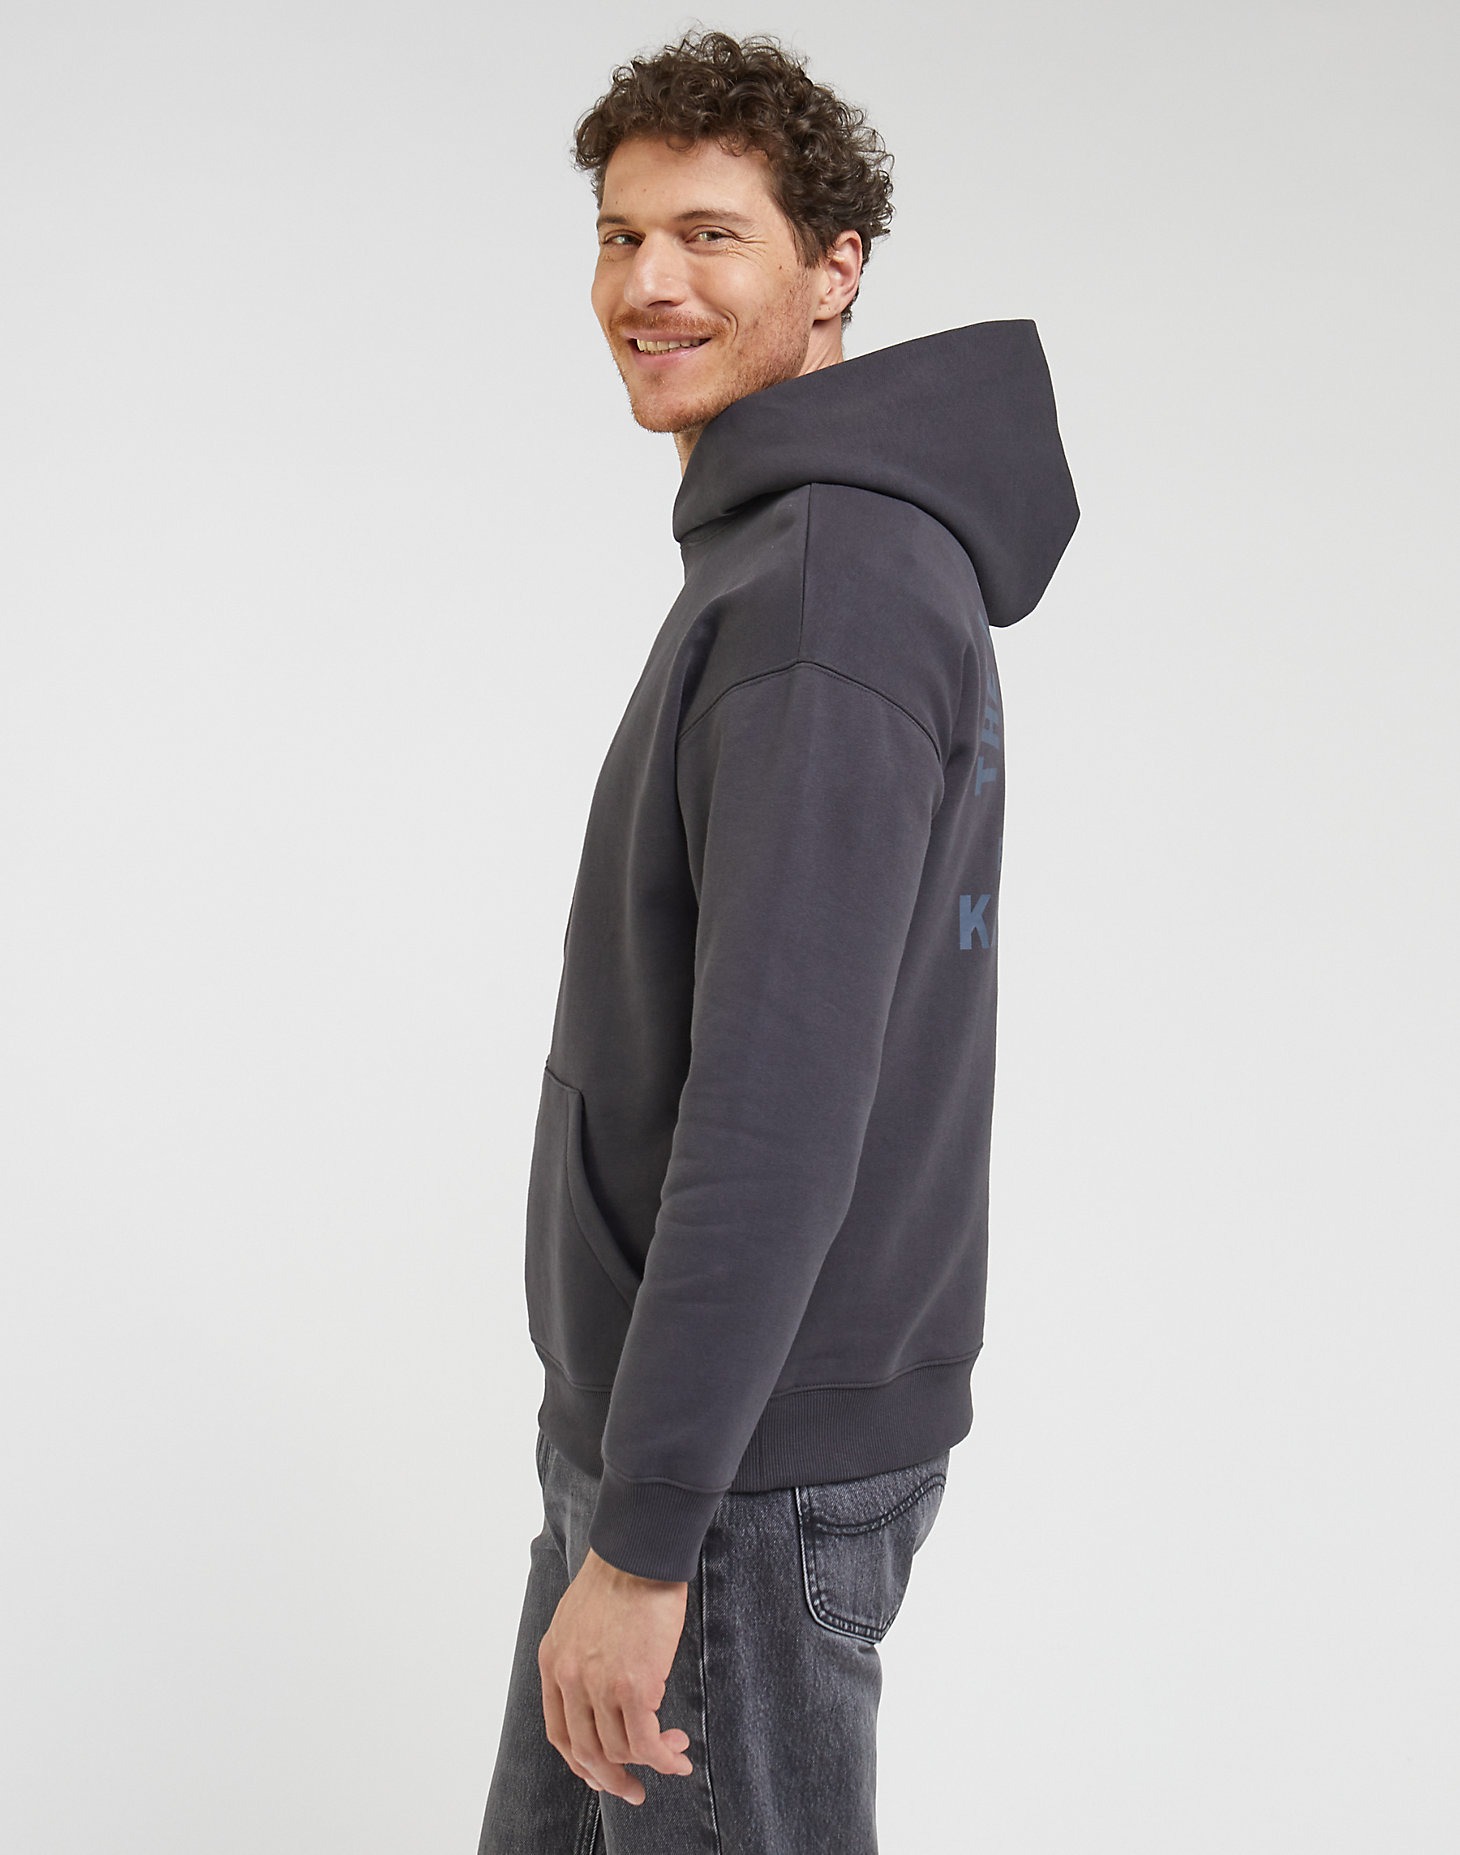 Relaxed Hoodie in Washed Black alternative view 3